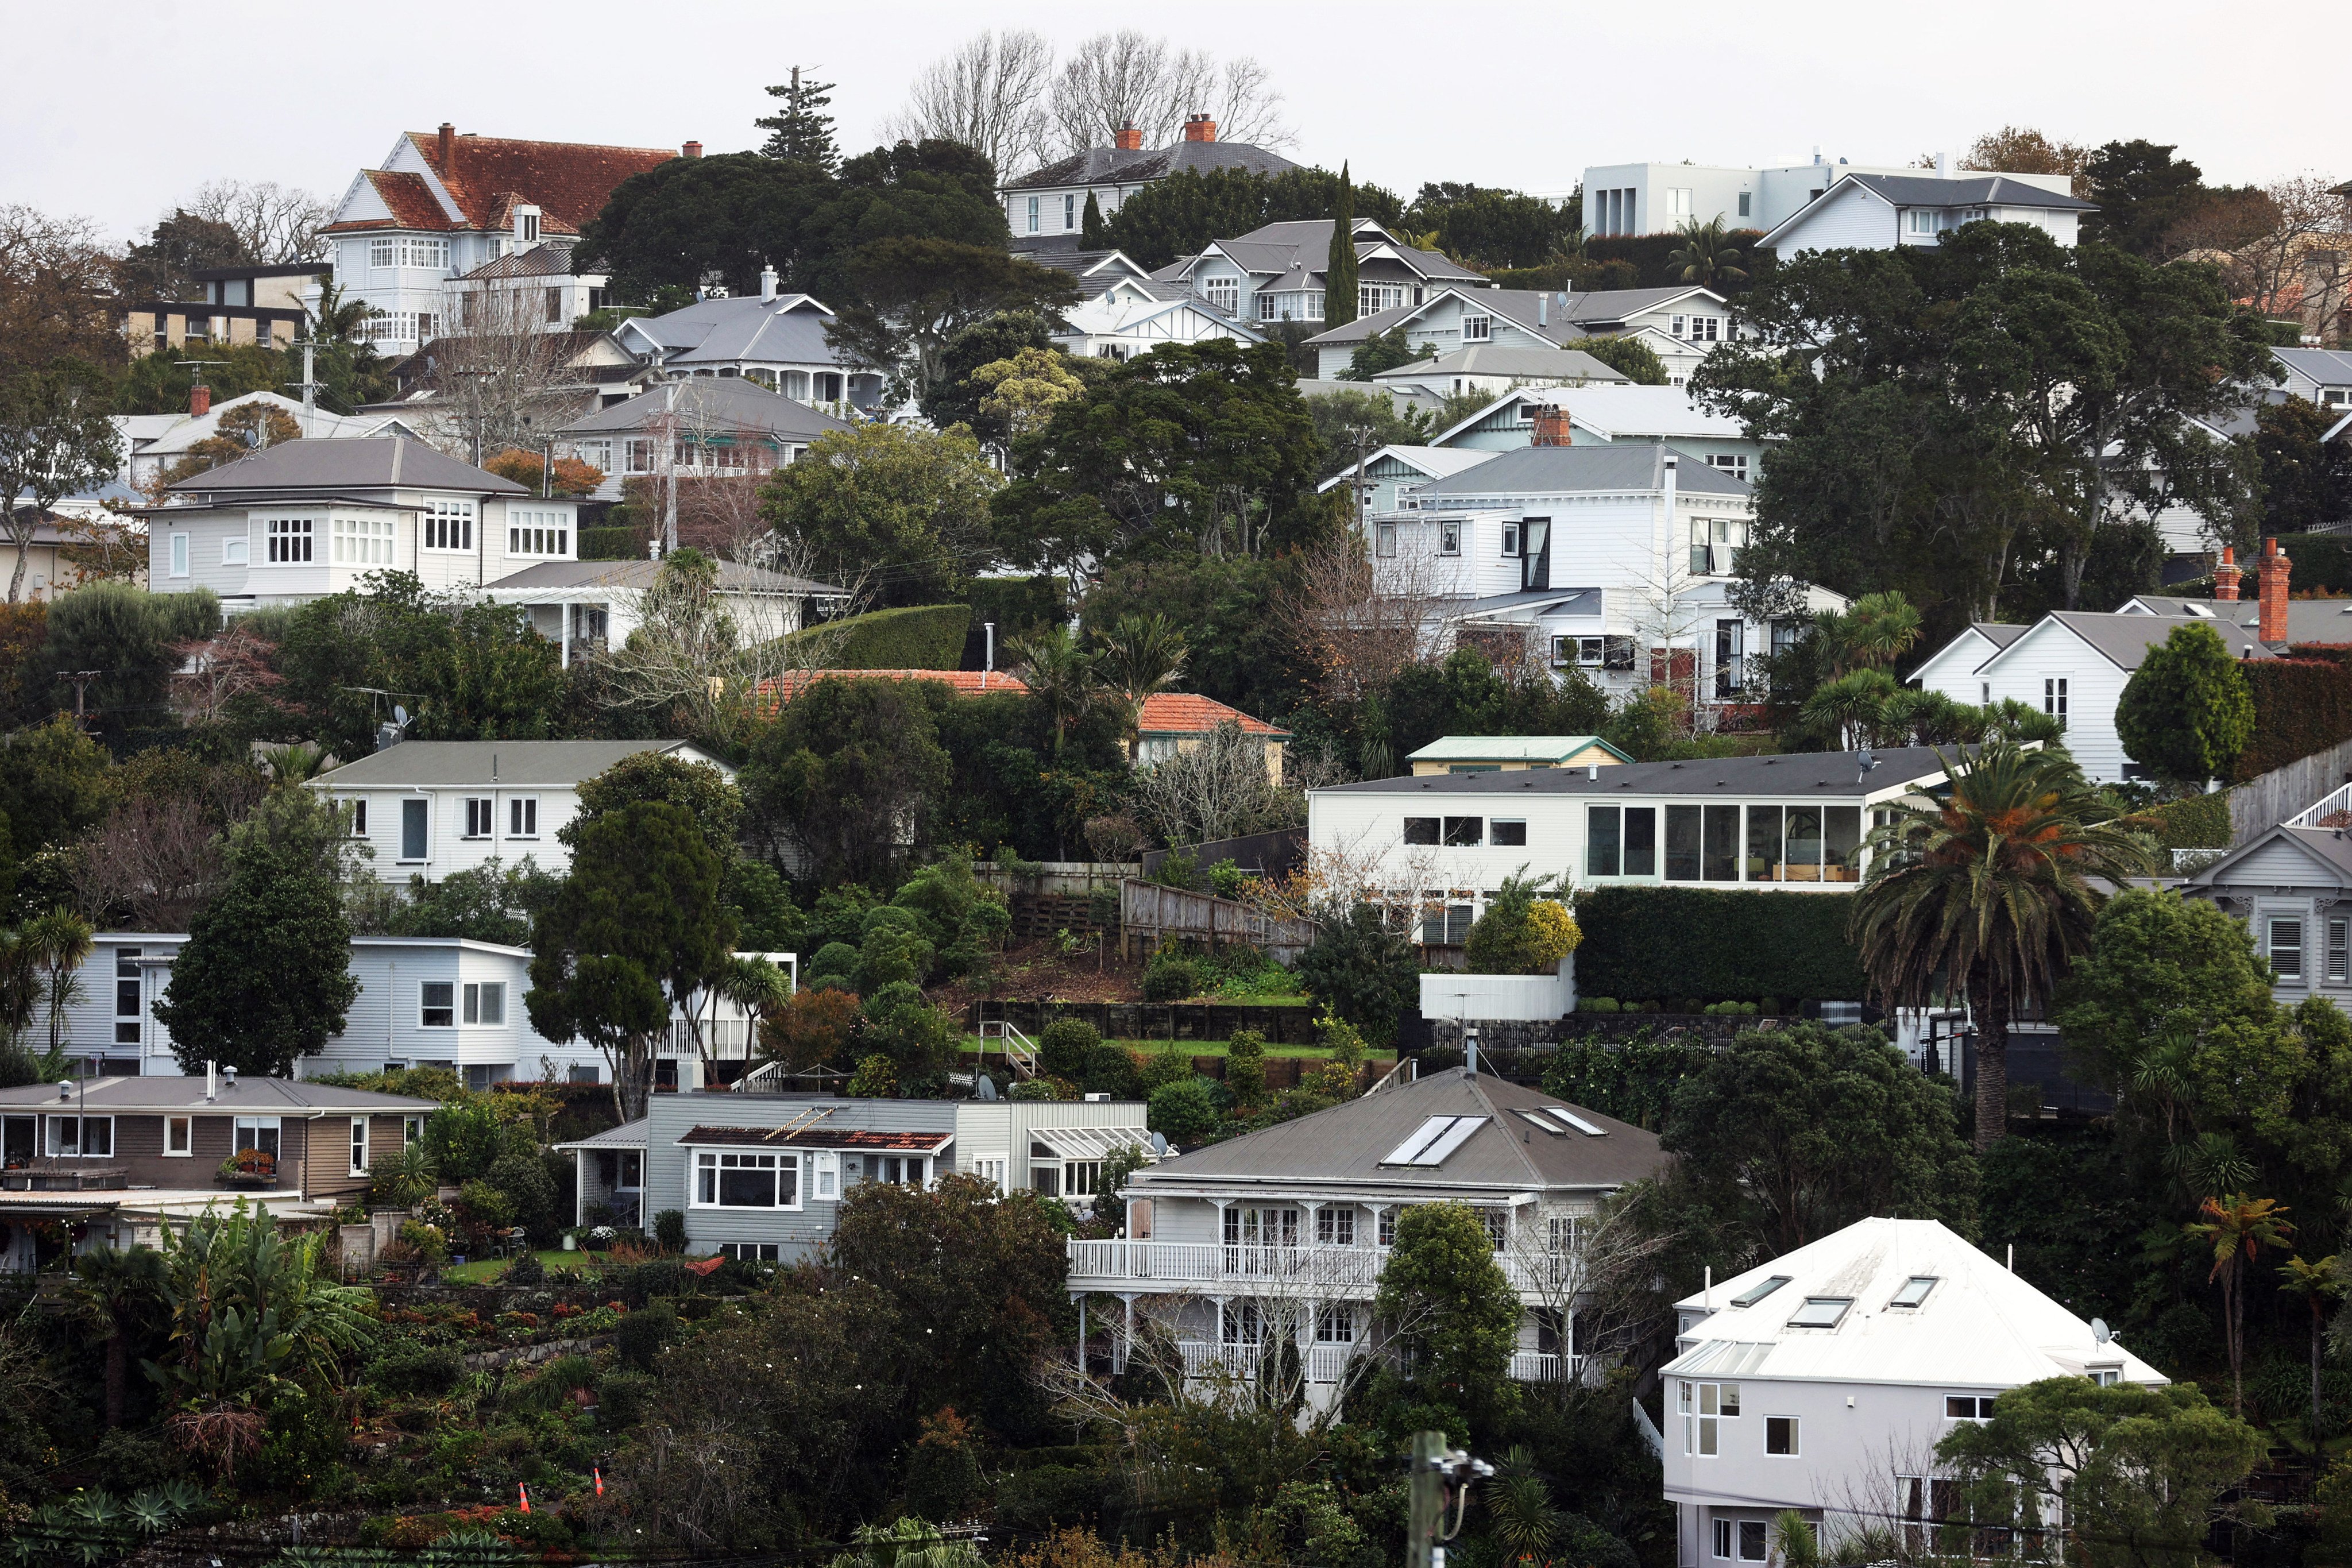 Houses in the Remuera area of Auckland on June 13. The bold reforms in New Zealand’s largest city that led to a housing construction boom are a template for other cities and countries where a lack of supply is driving up housing prices. Photo: Bloomberg